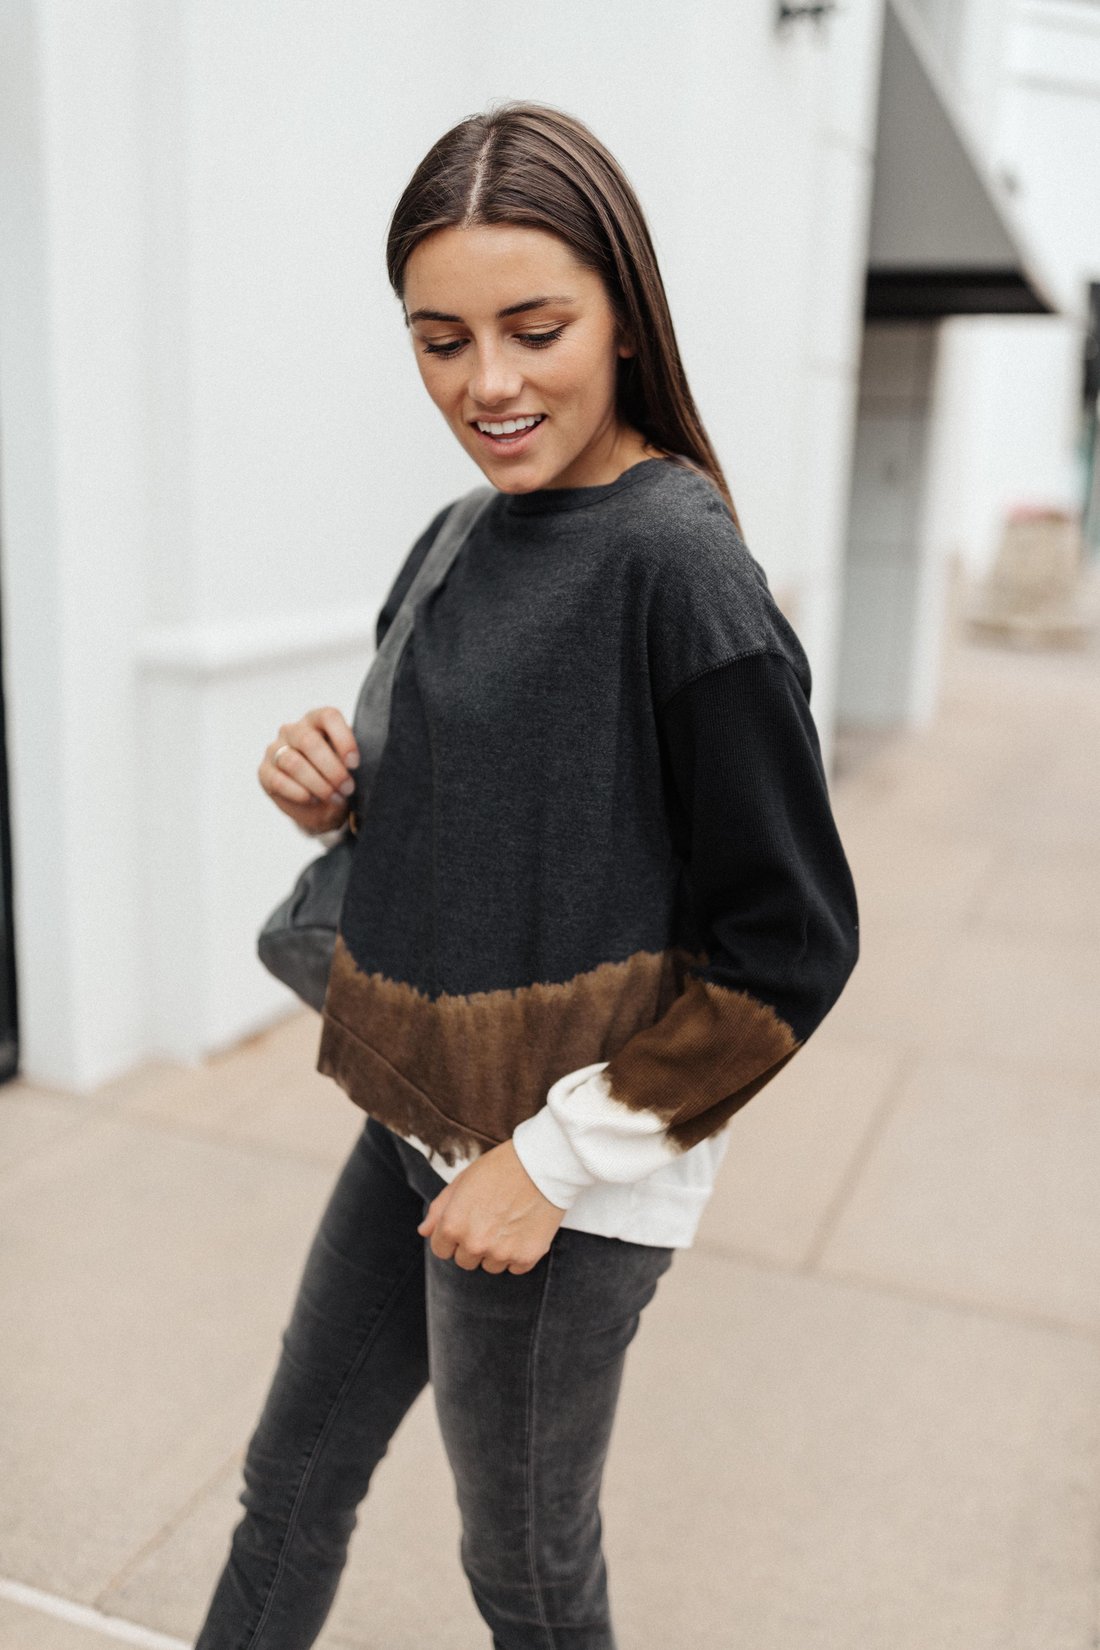 Oak Tree Boutique sells the cutest sweaters and comfiest sets to buy for yourself or gift to others. Support small businesses this holiday season | Kat Viana